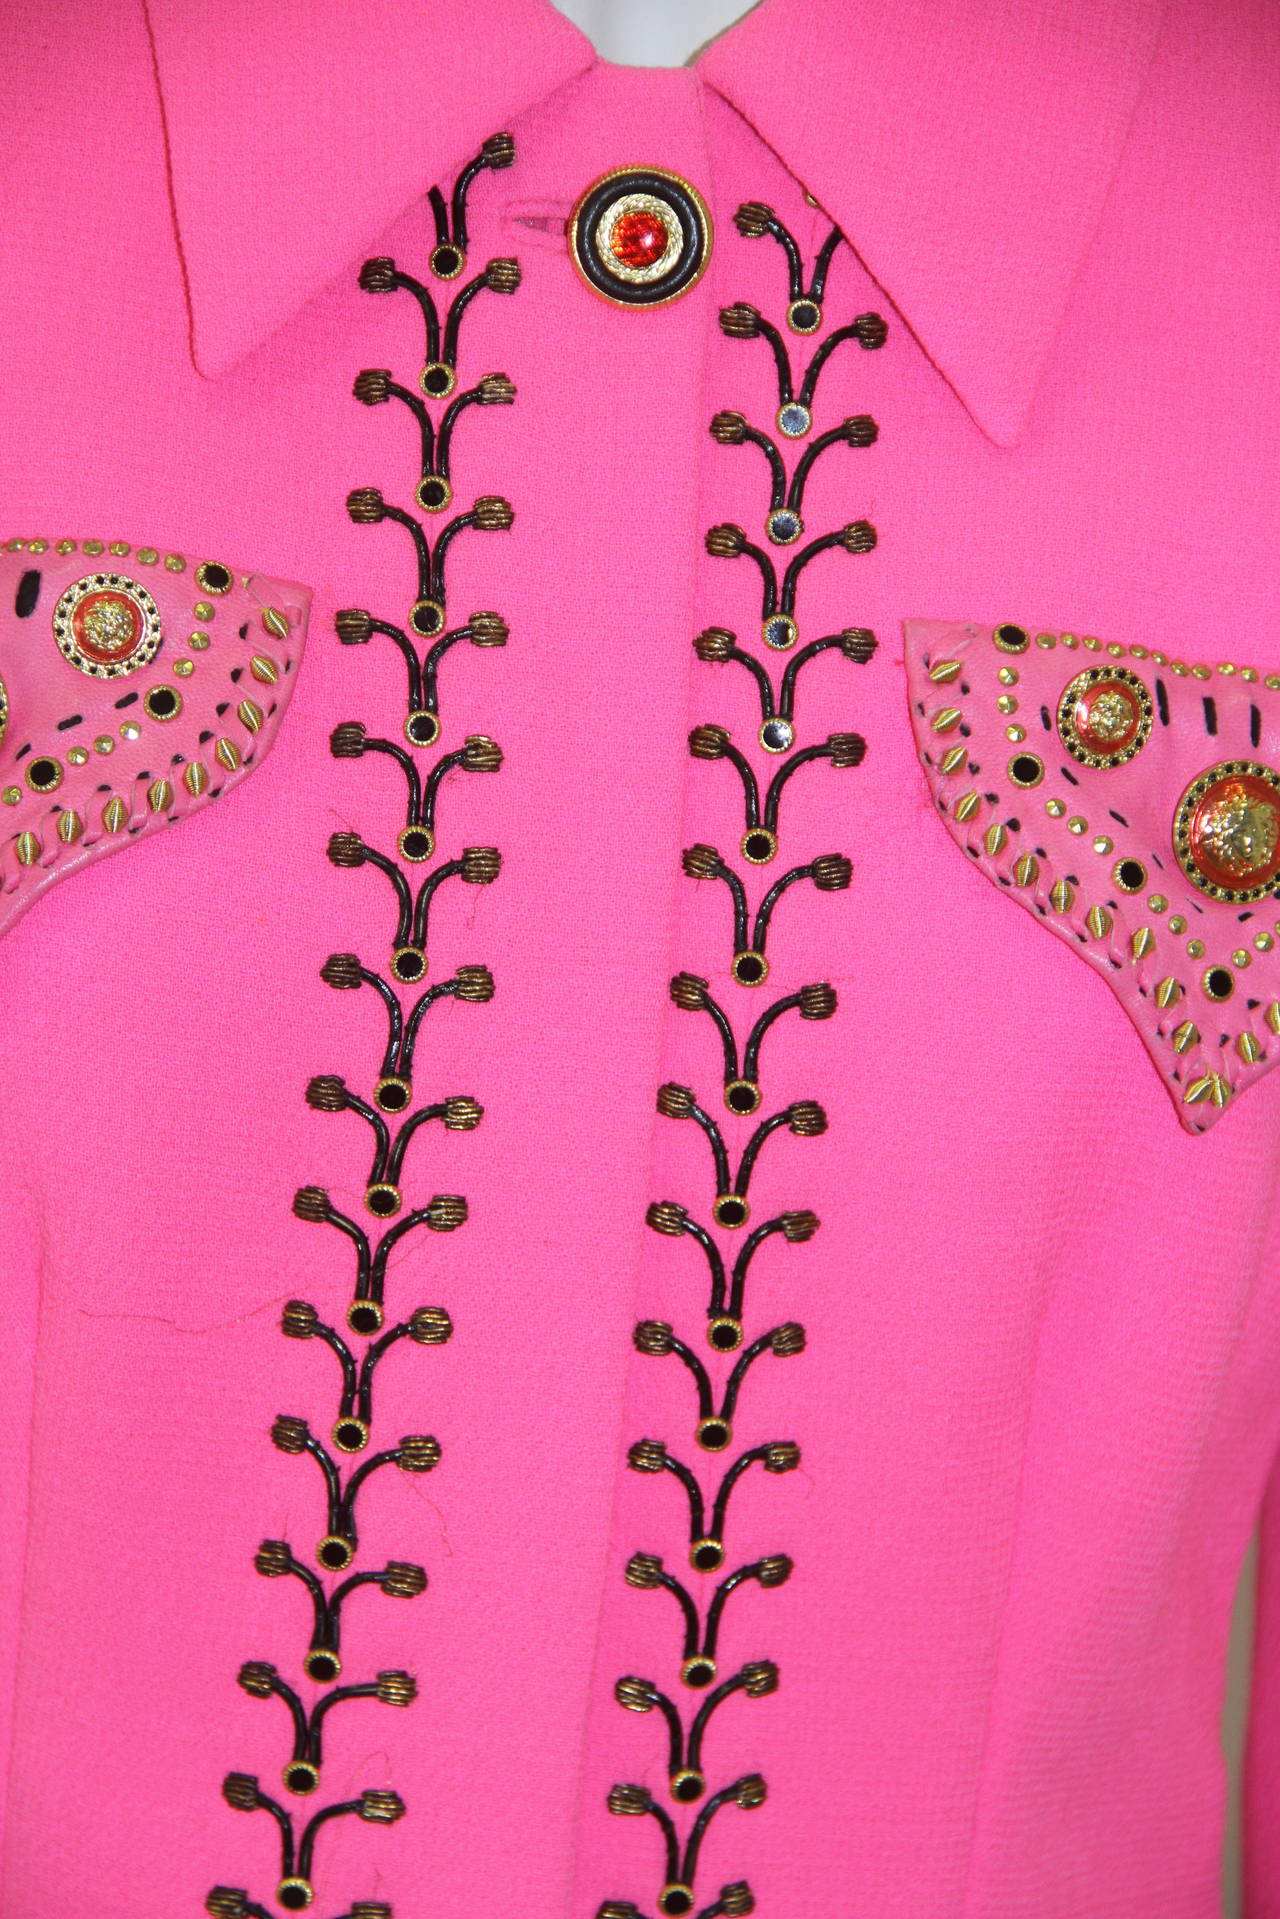 Museum Quality Atelier Versace shocking pink wool crepe cowgirl western inspired jacket from the Fall 1992 Atelier Bondage collection, shown at The Ritz in Paris.

The hand embroidered jacket features black thong embroidery, edged with gilt purl